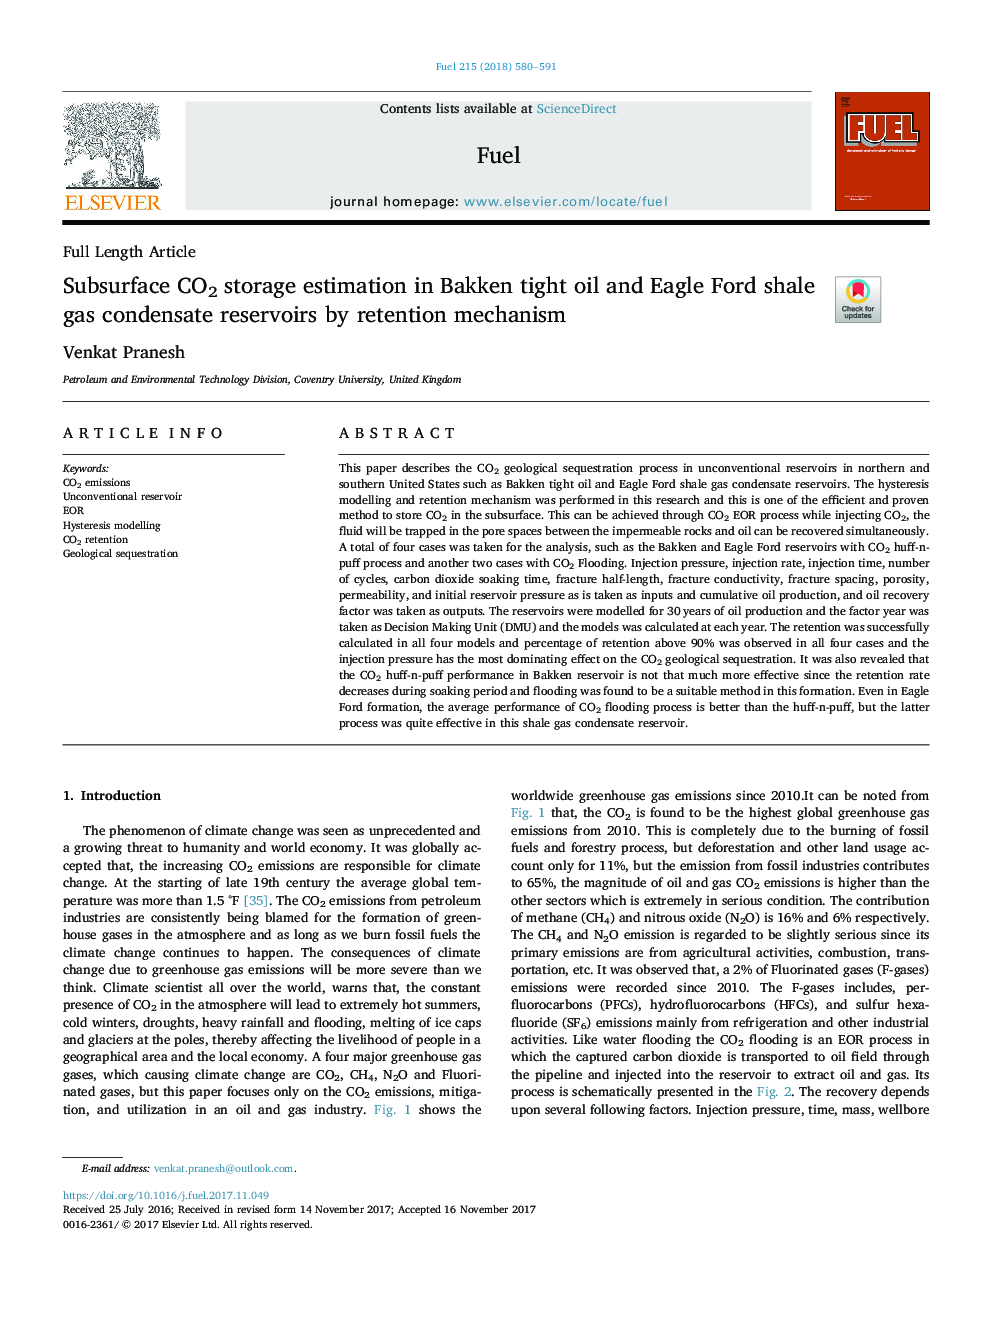 Subsurface CO2 storage estimation in Bakken tight oil and Eagle Ford shale gas condensate reservoirs by retention mechanism